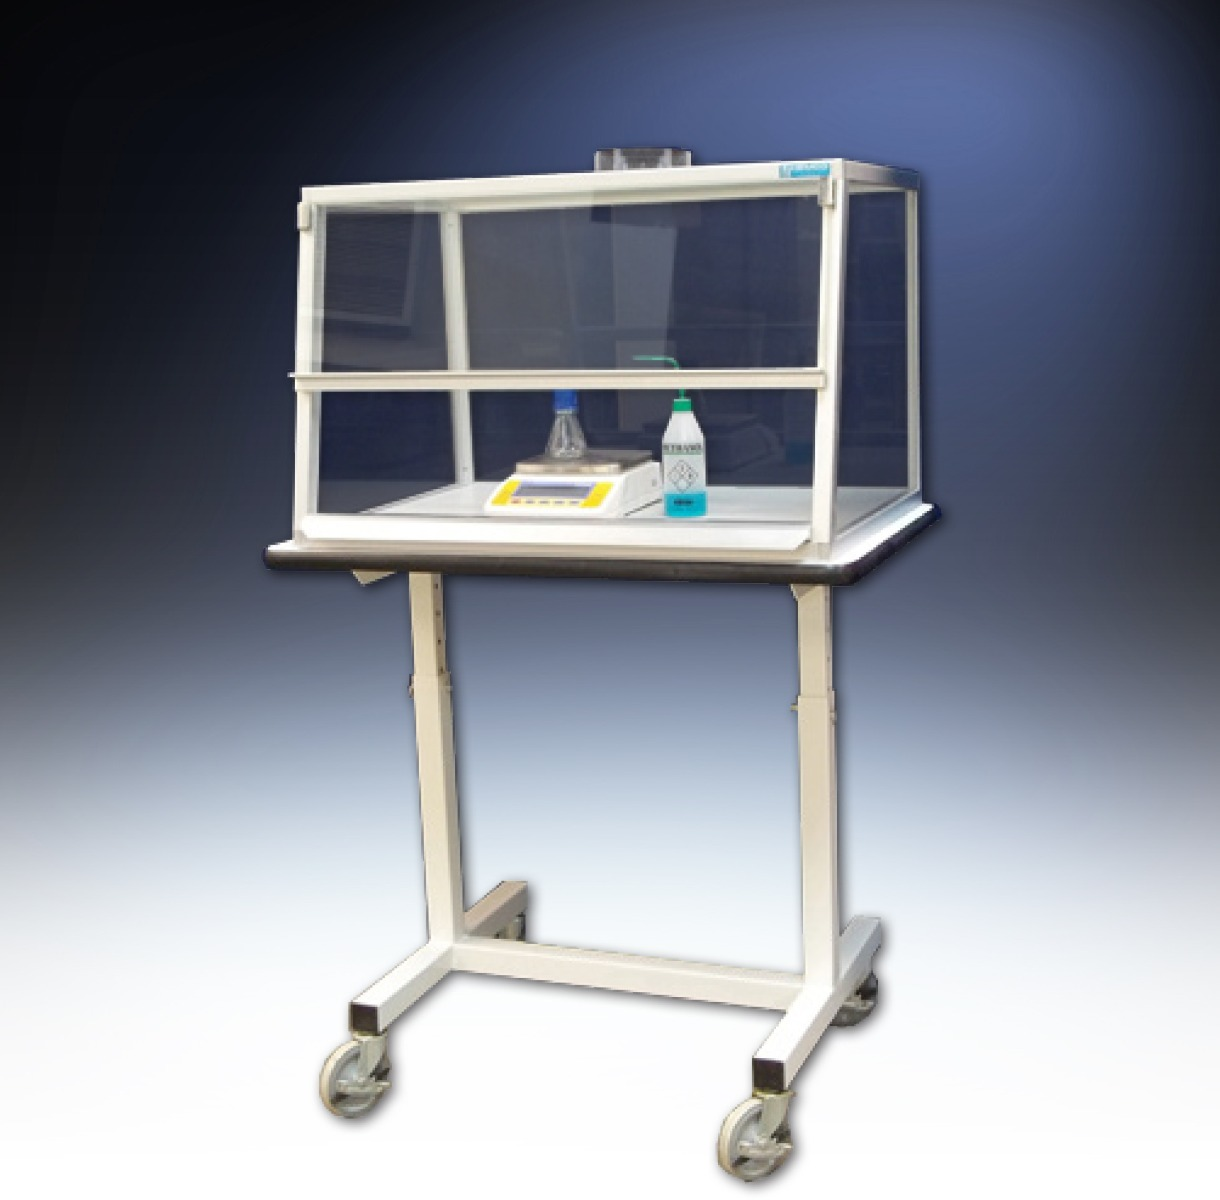 Vented Safety Enclosures (VSE) from HEMCO